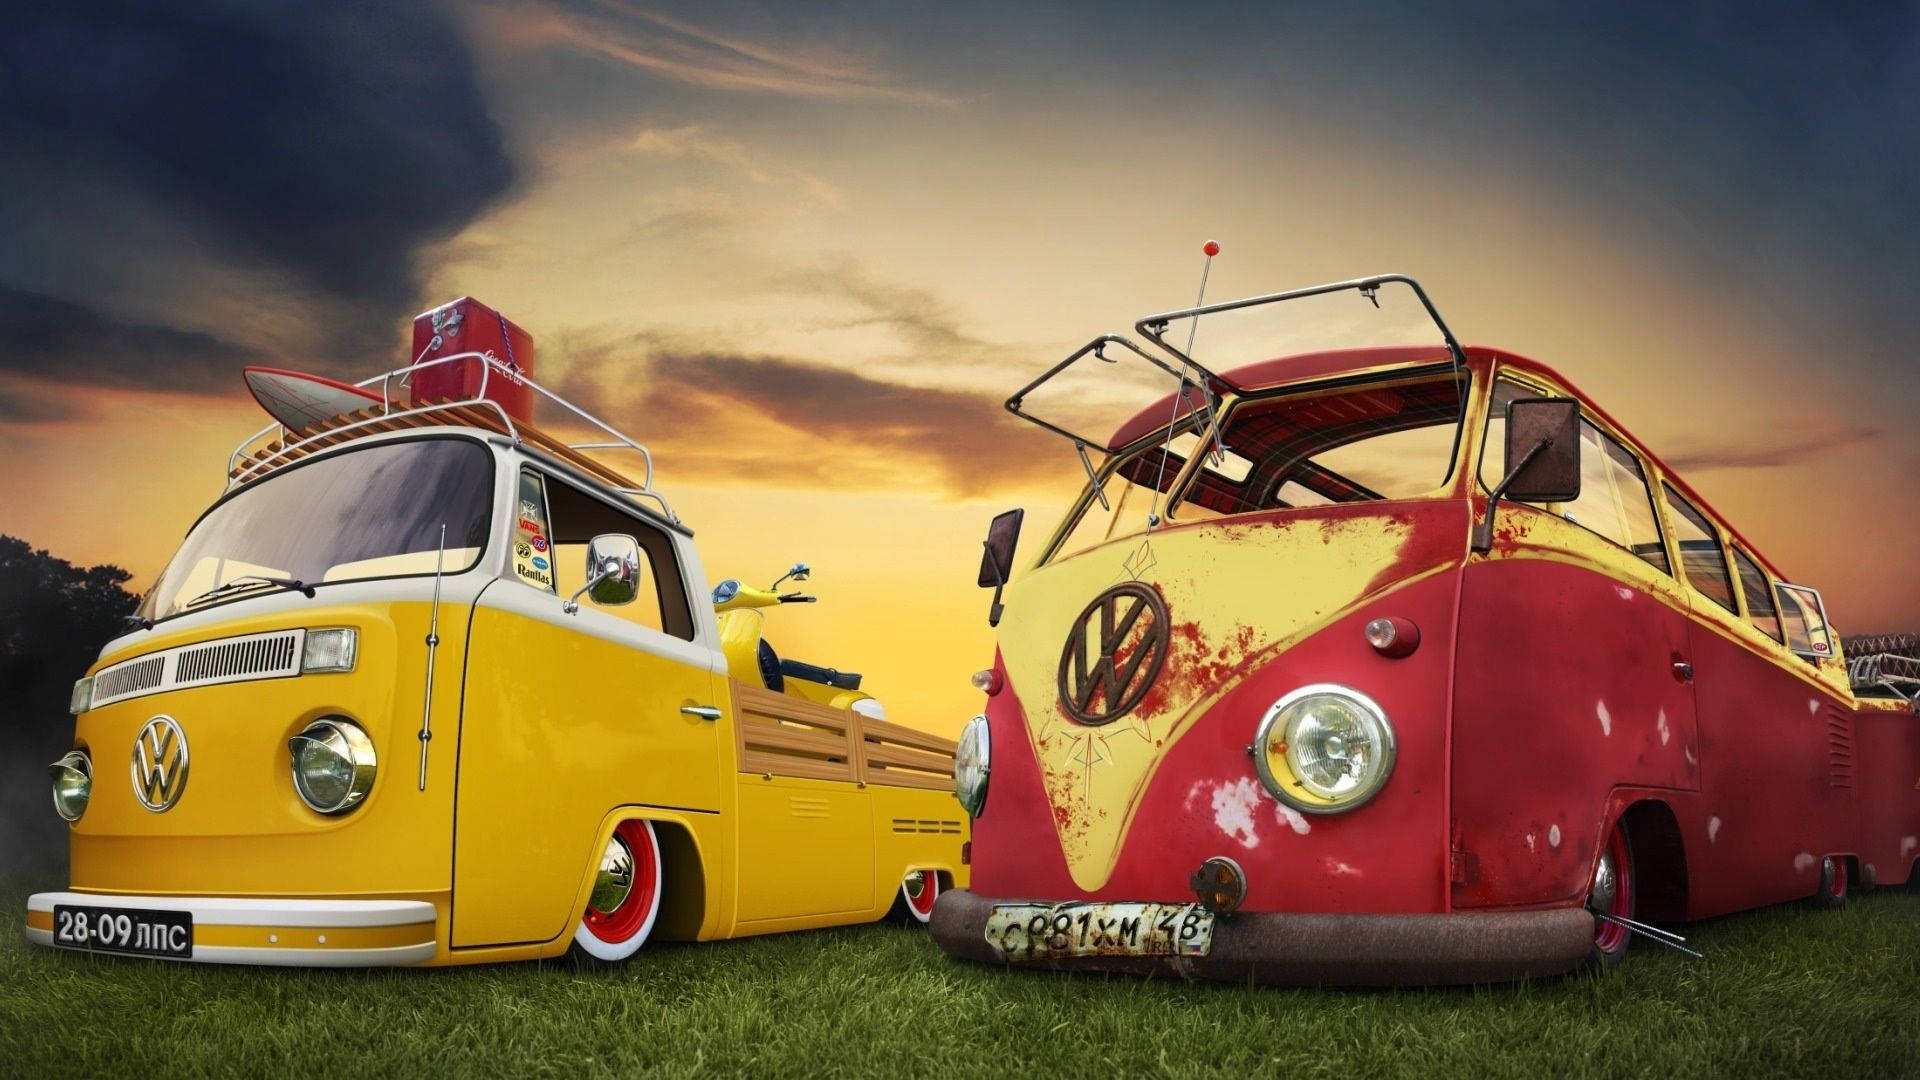 Start your journey with the iconic Volkswagen Type 2 Wallpaper